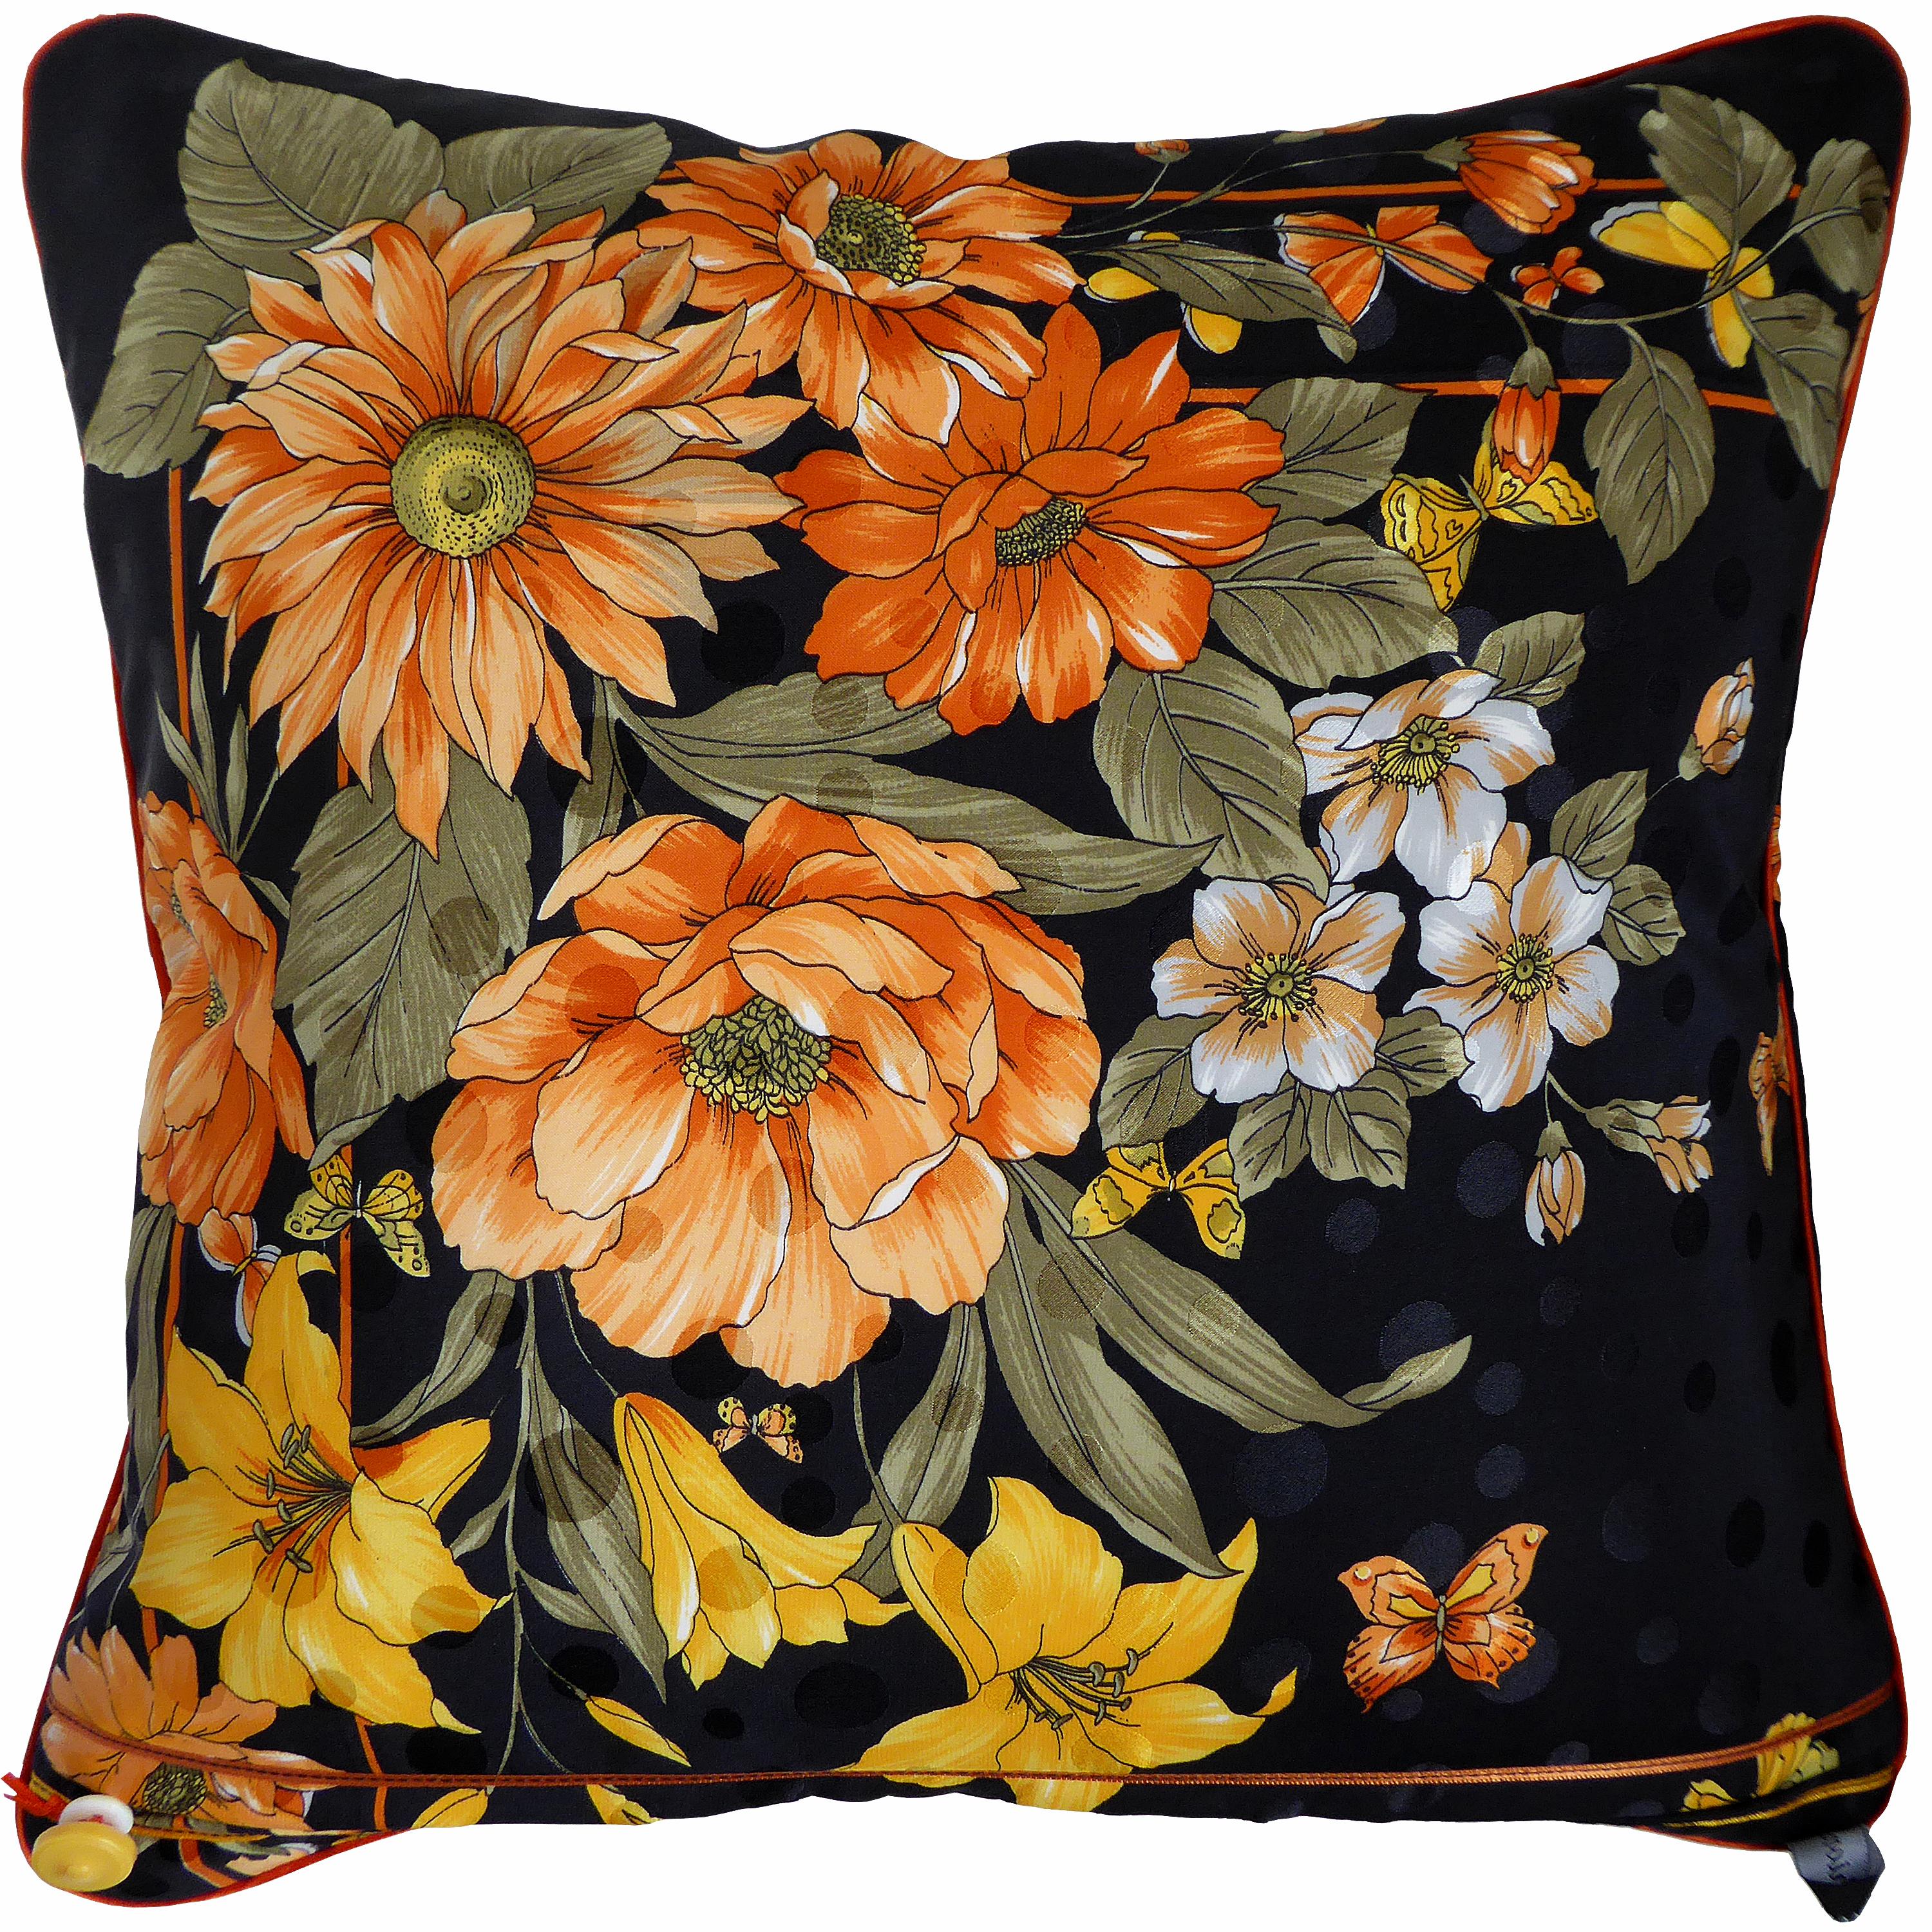 Auriella Fall,
circa 1970
British bespoke-made luxury cushion created using original vintage silk featuring glorious floral autumn images
Provenance: Italy
Made by Nichollette Yardley-Moore
Vintage Cushions
Silk with complete interfacing and with